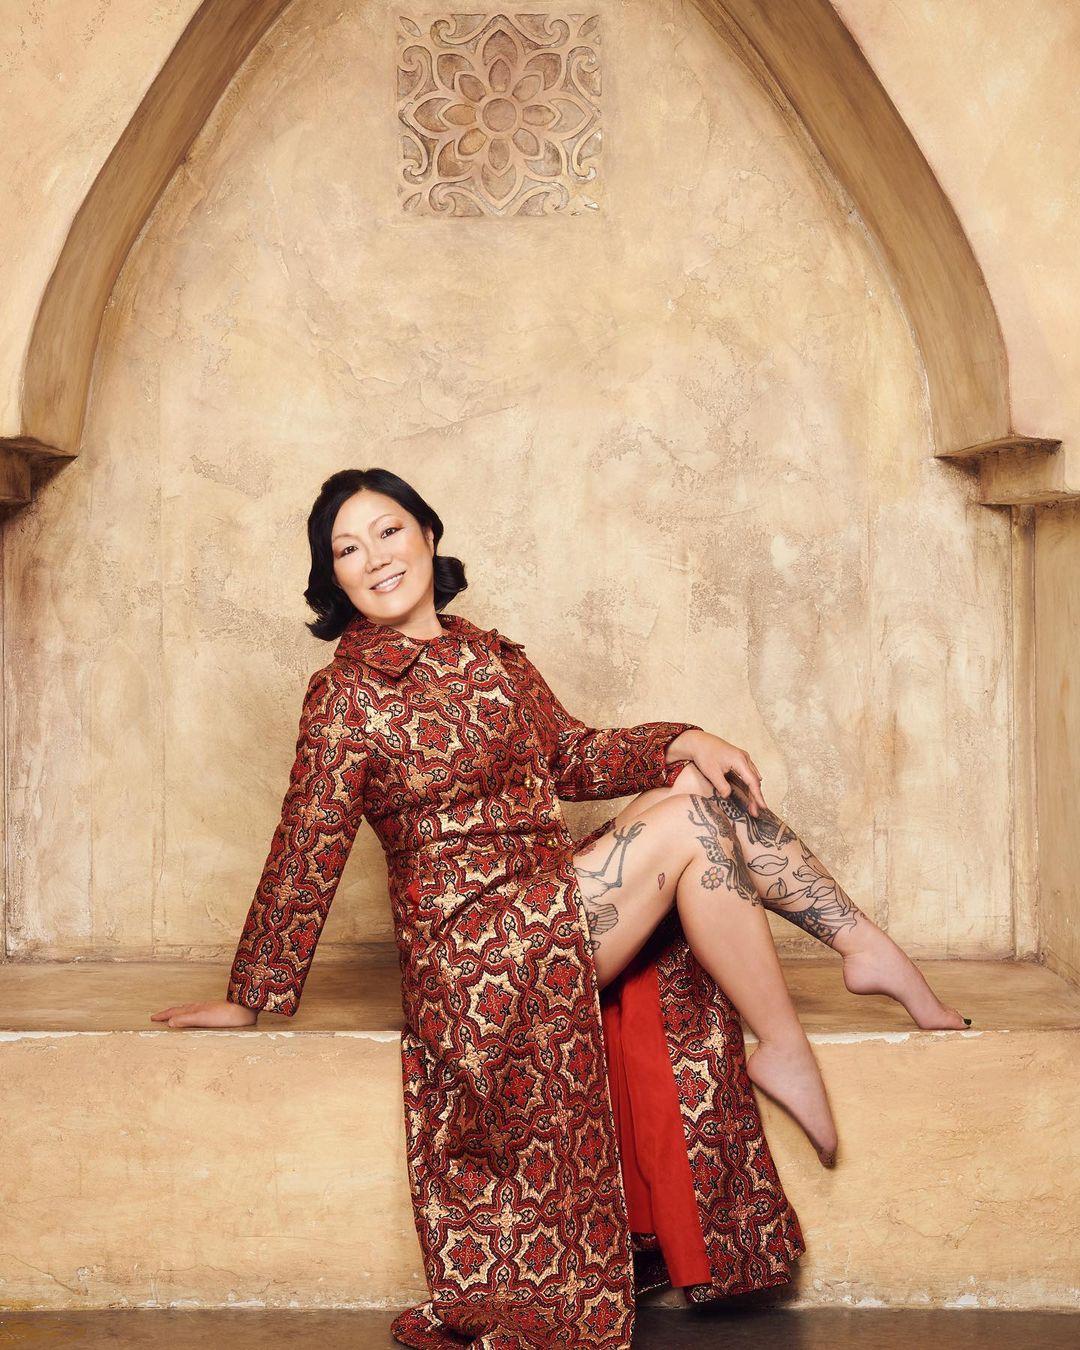 A photo showing Margaret Cho in an embroidered slit dress, sitting on a cemented surface.